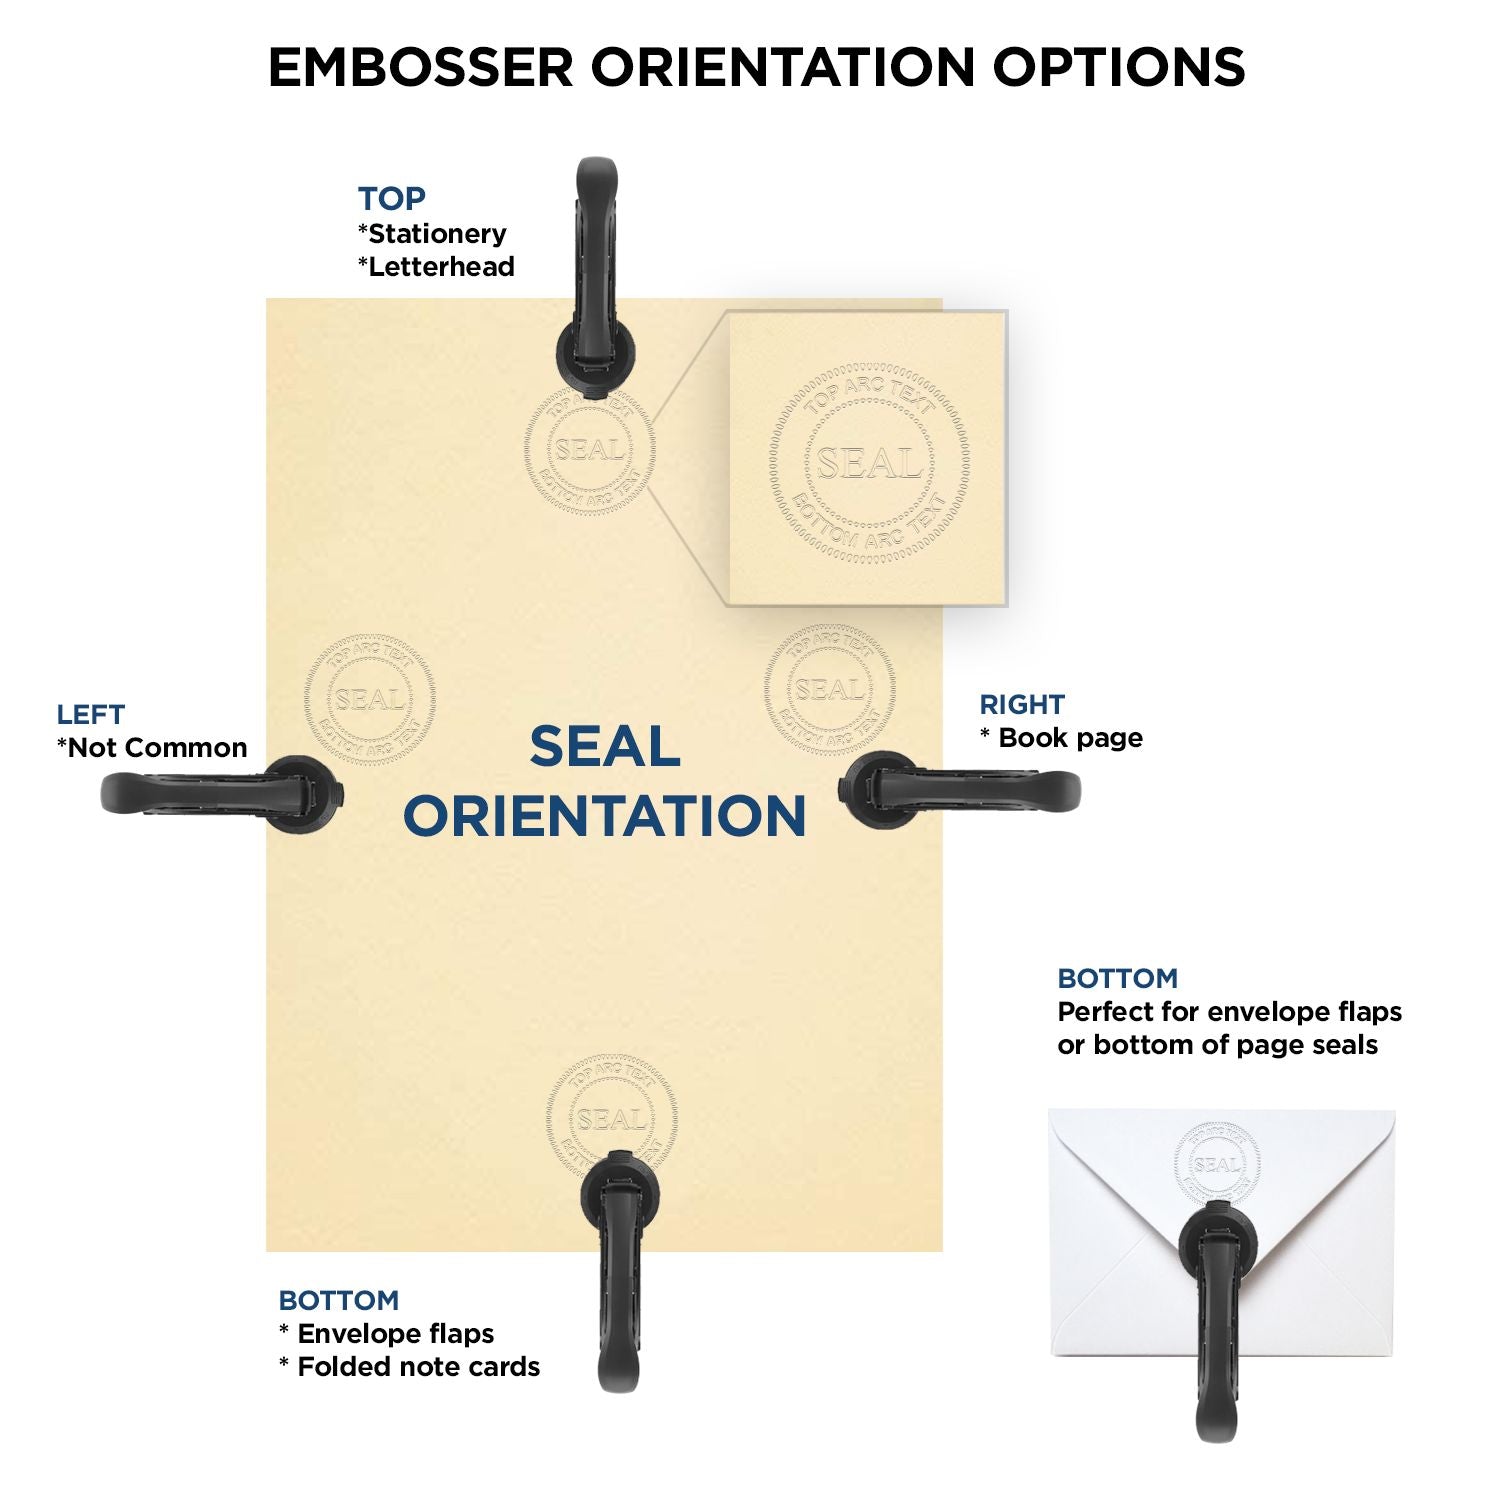 An infographic for the Heavy Duty Cast Iron New Mexico Land Surveyor Seal Embosser showing embosser orientation, this is showing examples of a top, bottom, right and left insert.